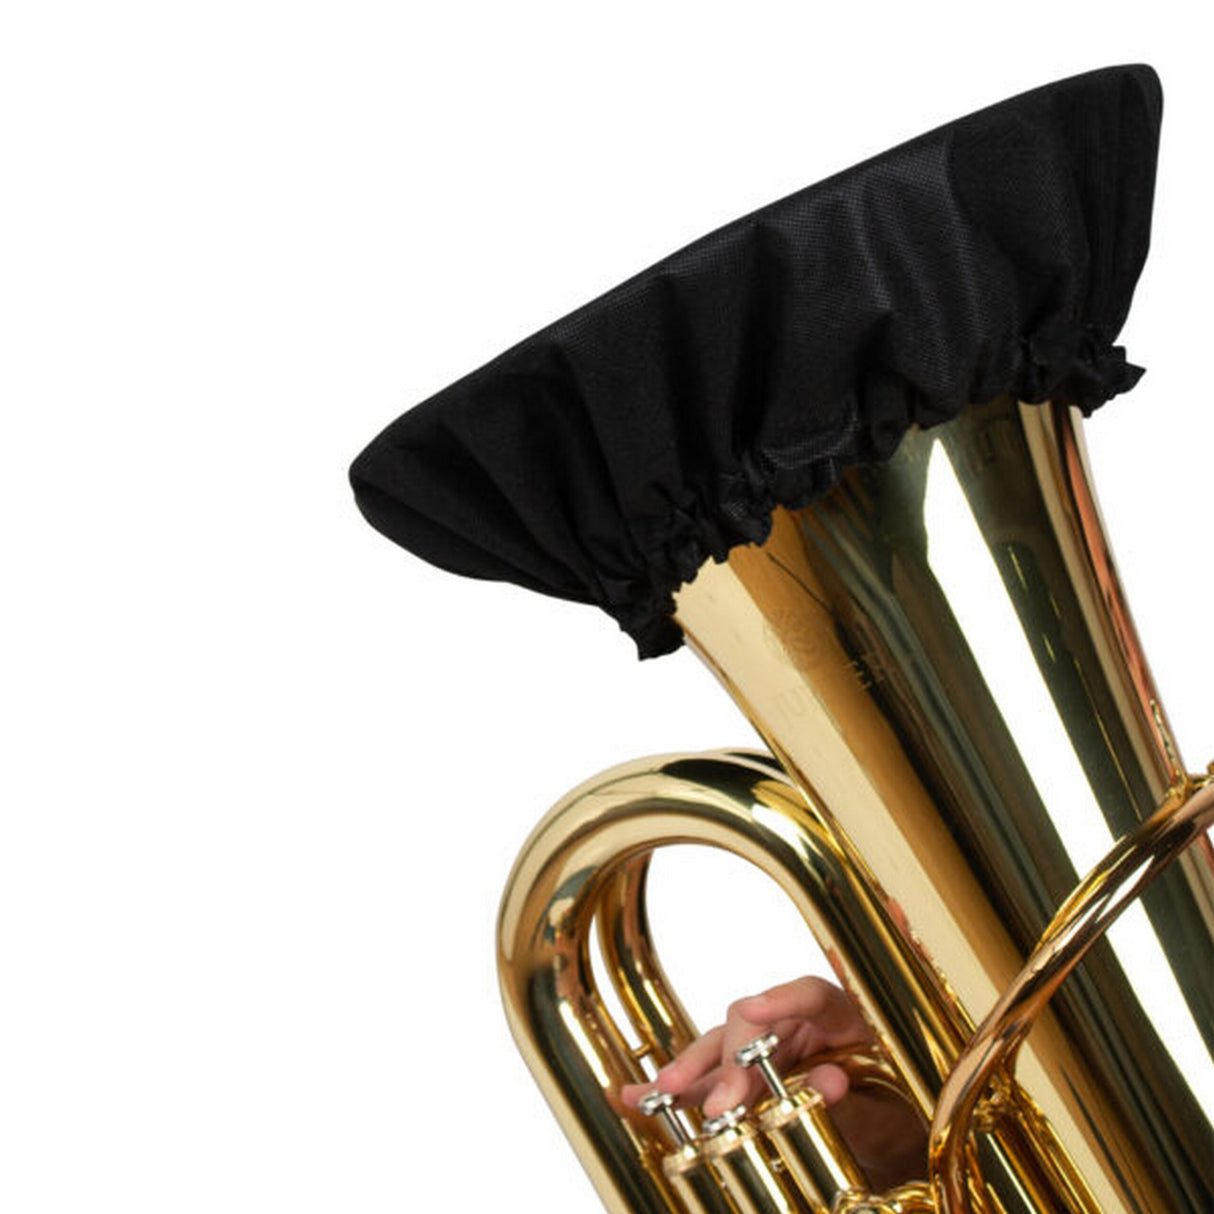 Gator GBELLCVR2426BK Wind Instrument Double-Layer Cover for Bell Sizes Ranging from 24 to 26-Inches, Black Color